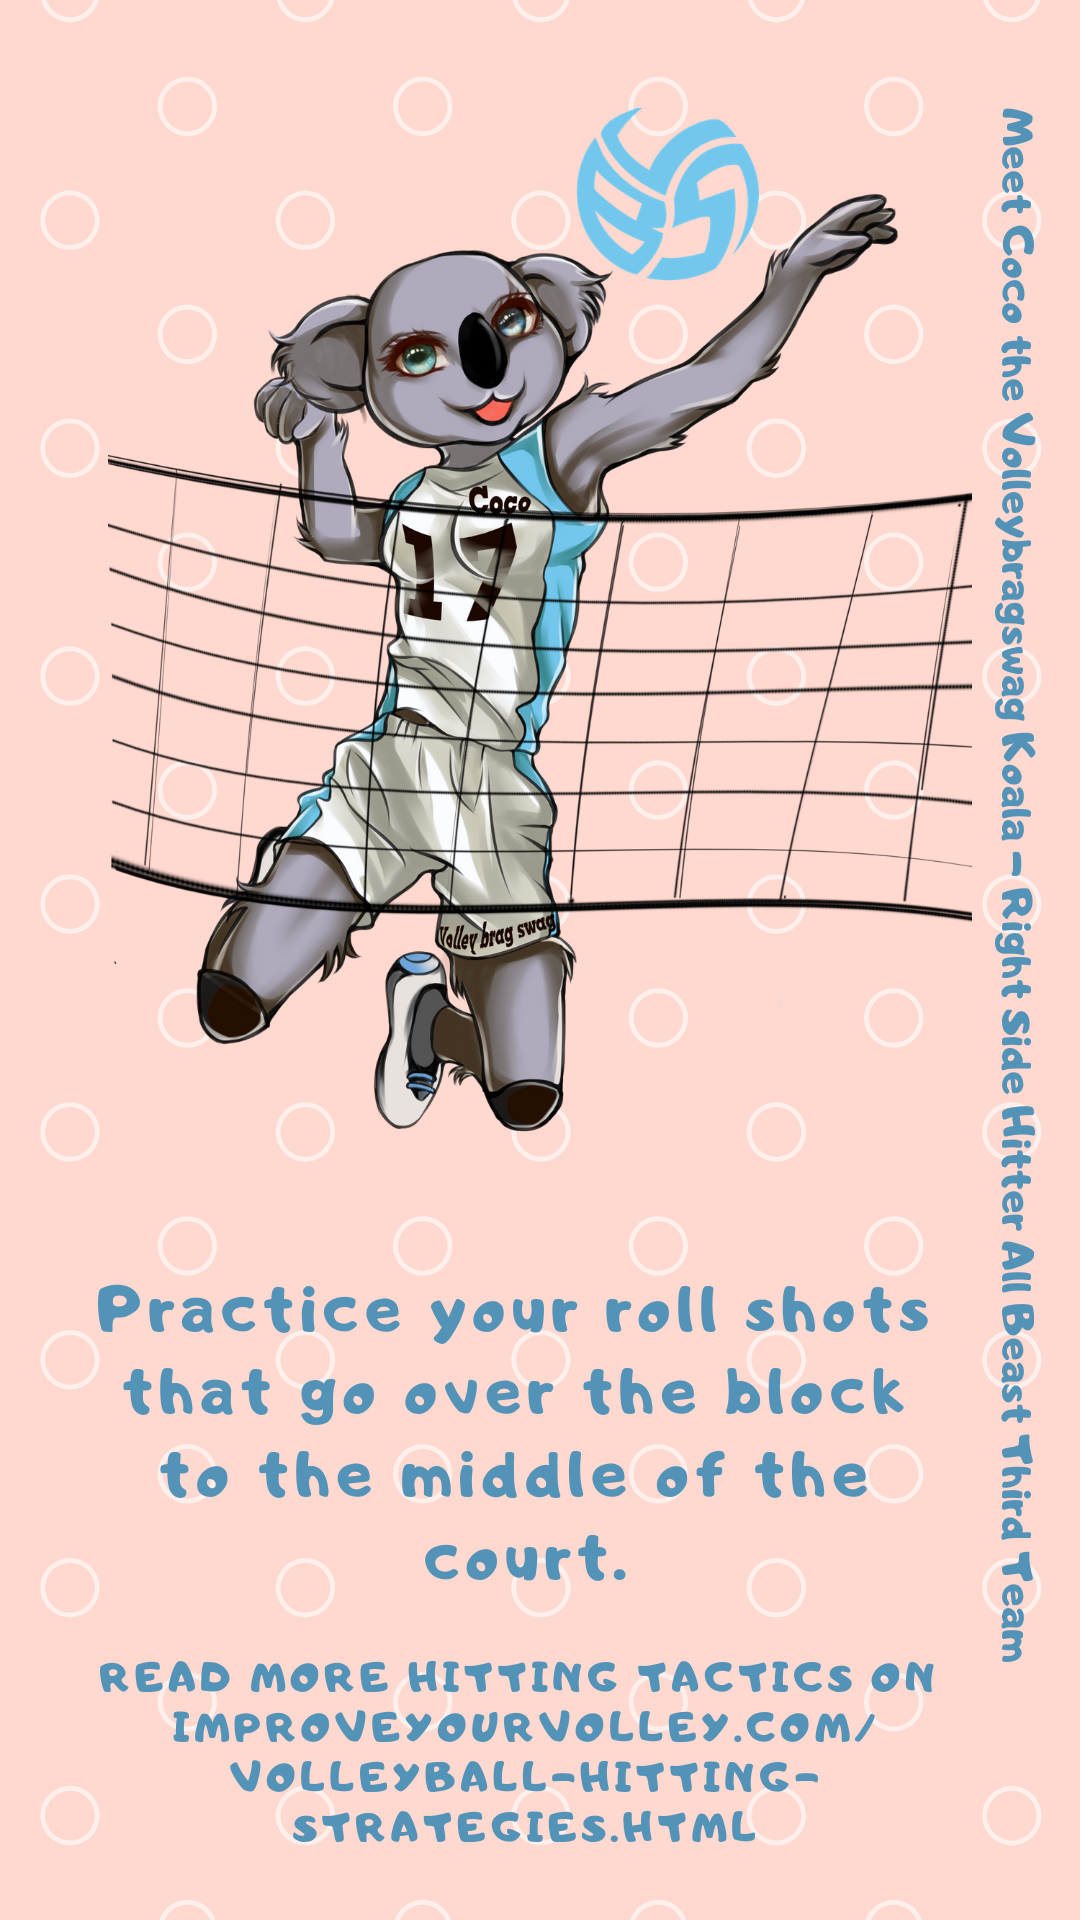 Hitting Tactics: Practice your roll shots and aim them for the middle of the opposing team's court.